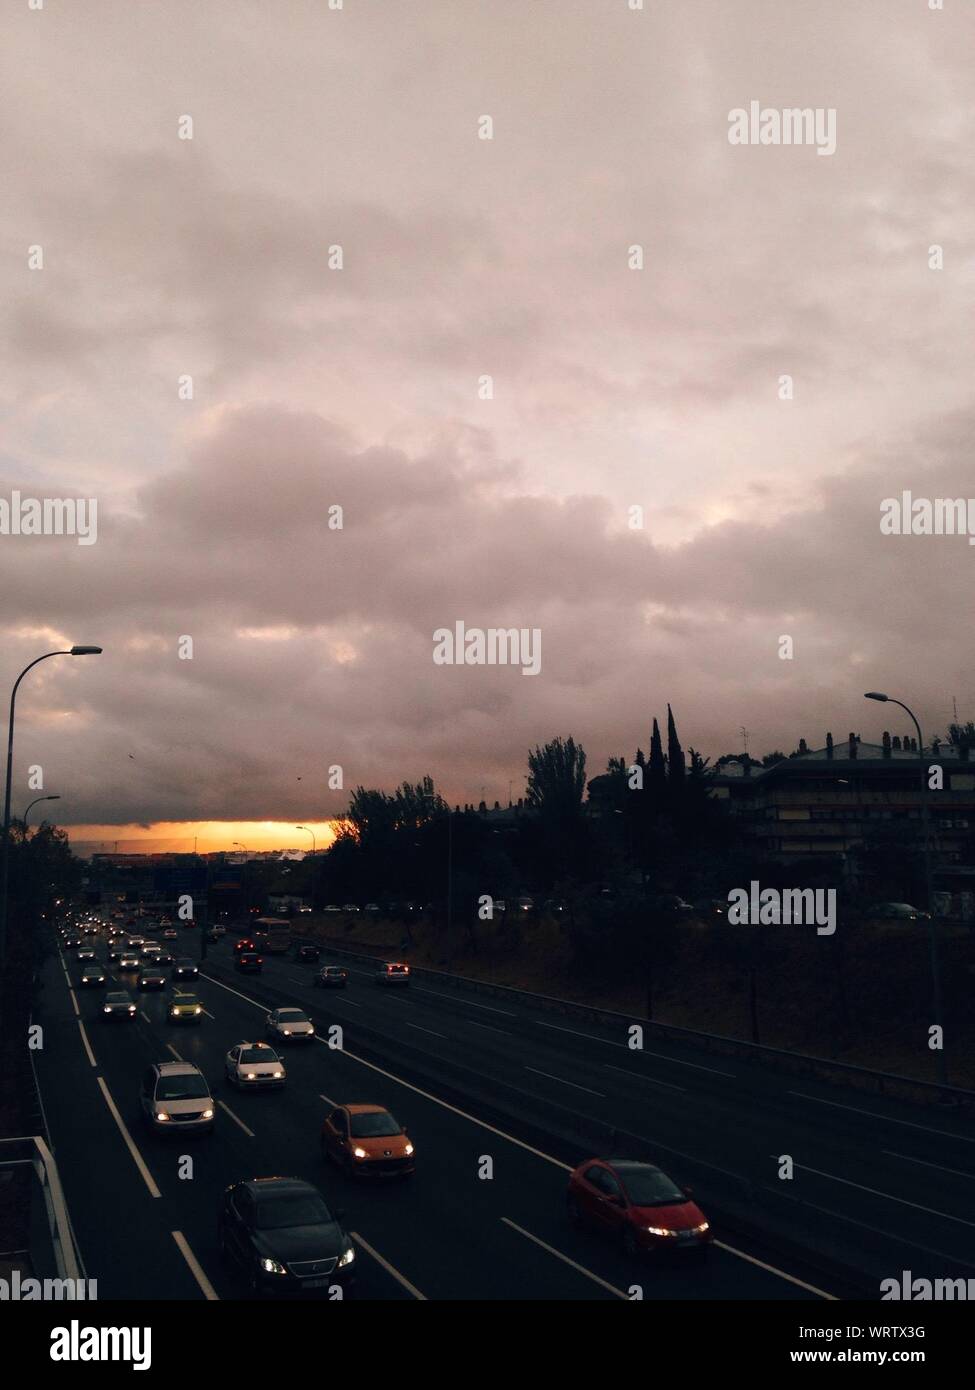 Elevated View Of Road And Oncoming Traffic At Dusk Stock Photo